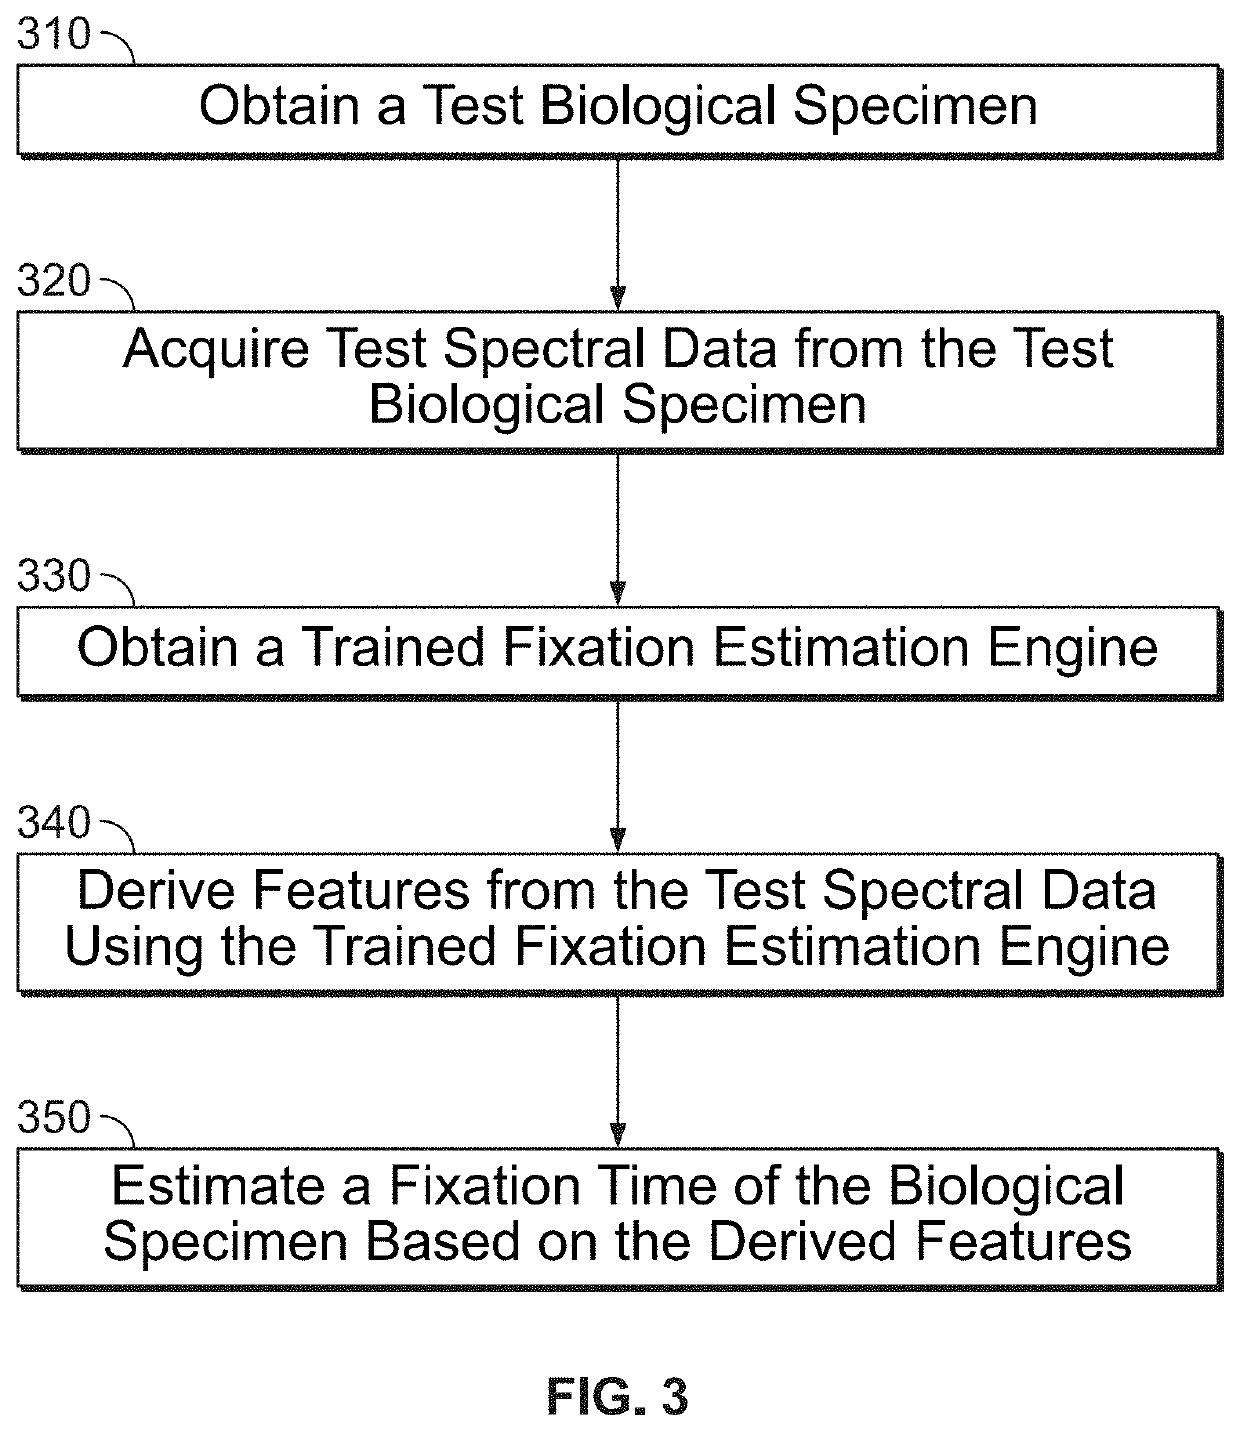 Systems and methods for assessing specimen fixation duration and quality using vibrational spectroscopy